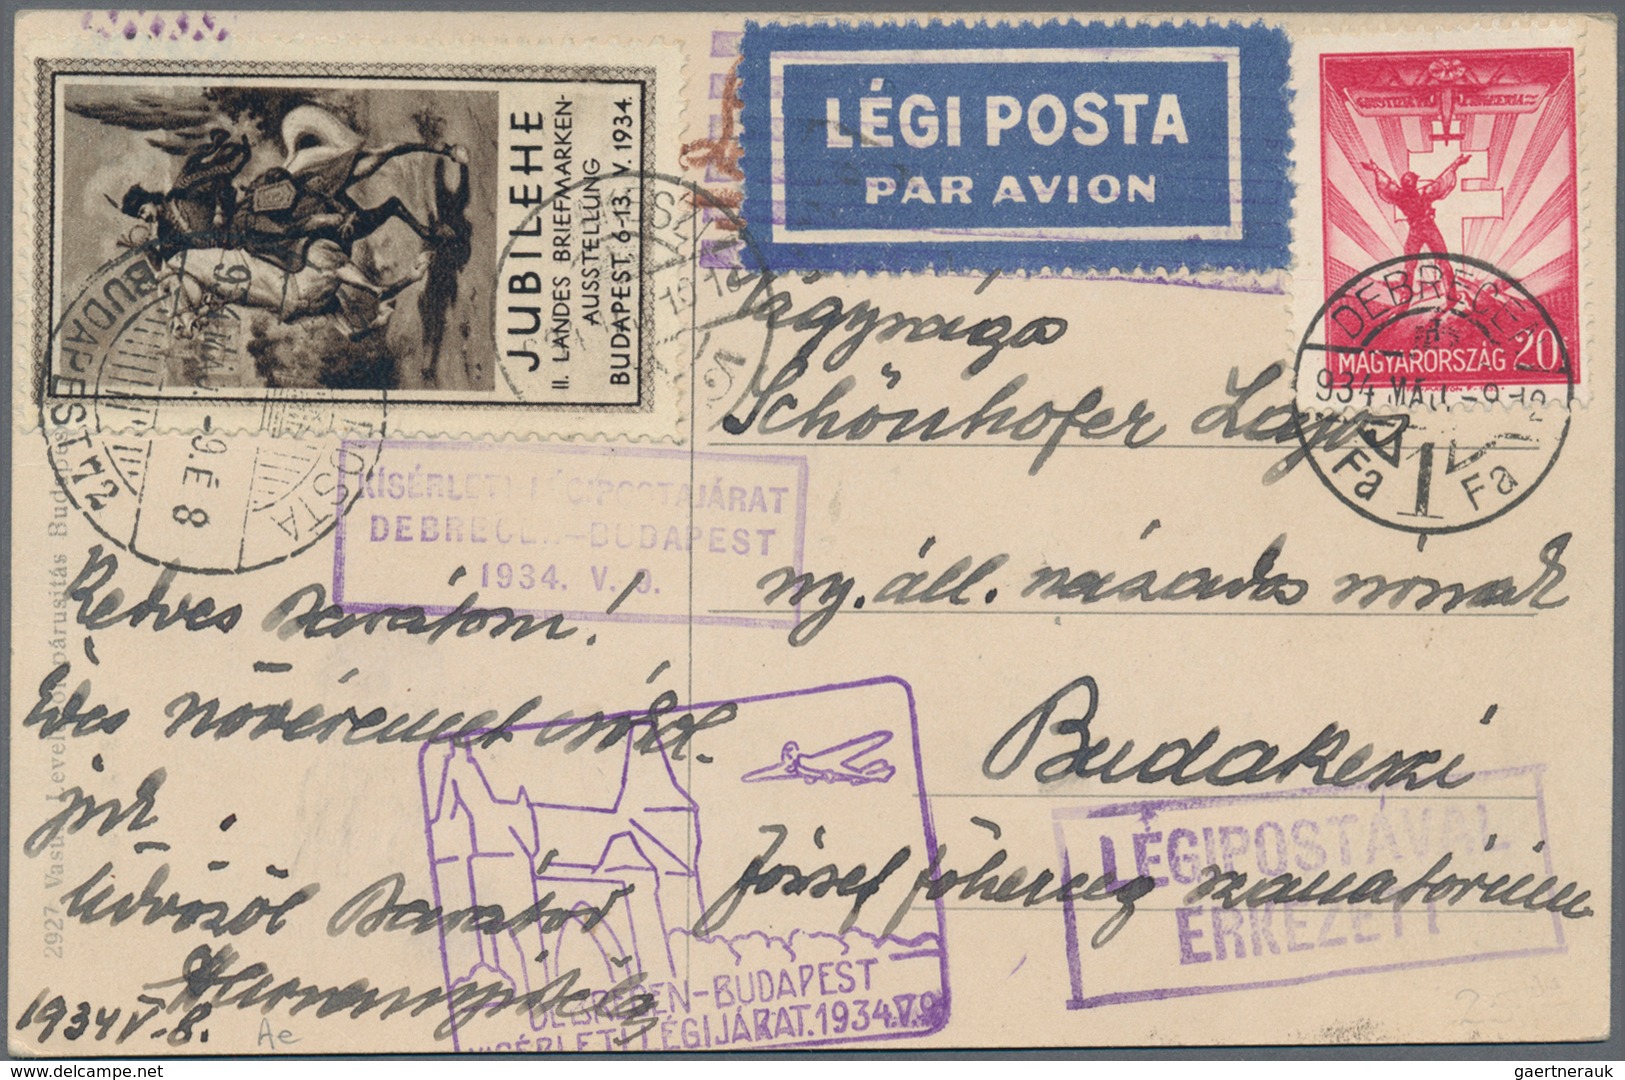 Europa - Ost: 1870/1960 (ca.), comprehensive holding of covers/cards, comprising Poland, Hungary, Yu